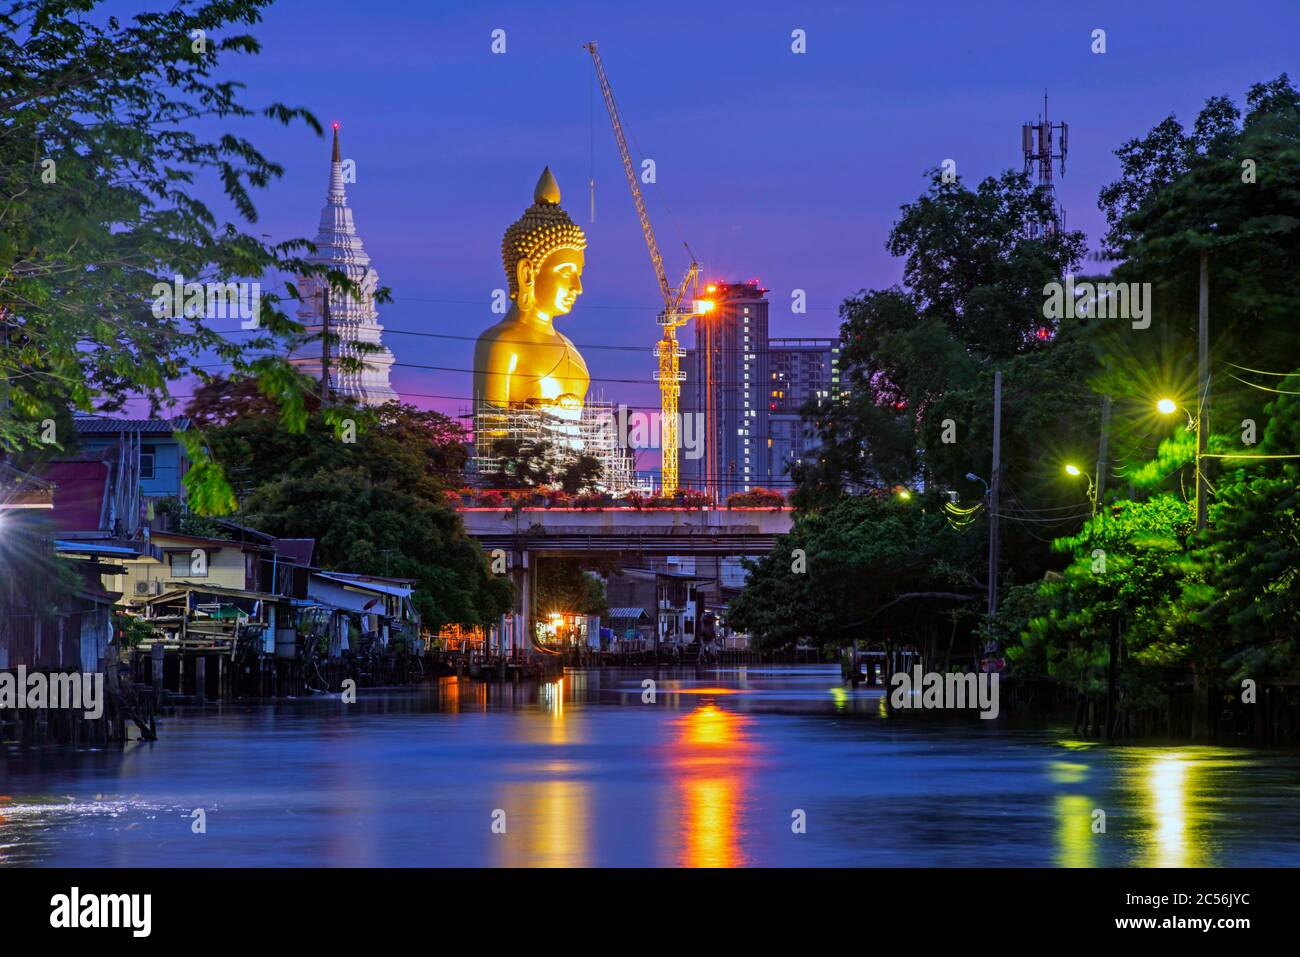 A new Buddha appears on the Bangkok skyline. The statue, called ‘Dhammakaya Thep Mongkol Buddha’ at Paknam Bhasicharoen Temple, is made of copper, and Stock Photo